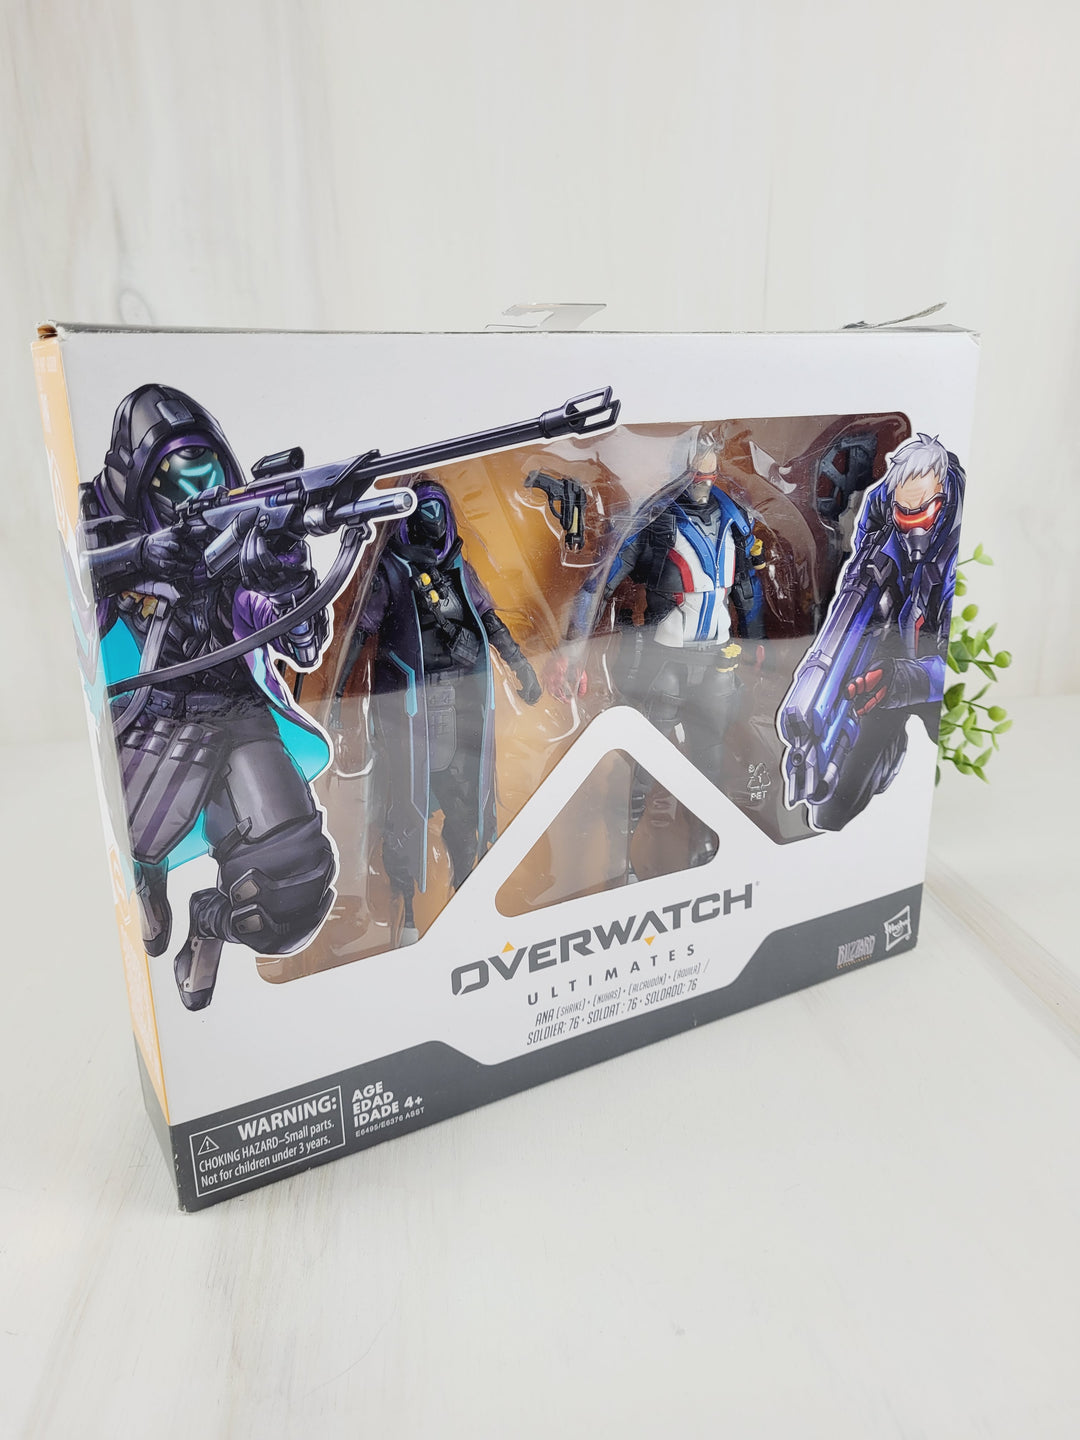 OVERWATCH ULTIMATES- ANA & SOLDIER TOY SET NEW!